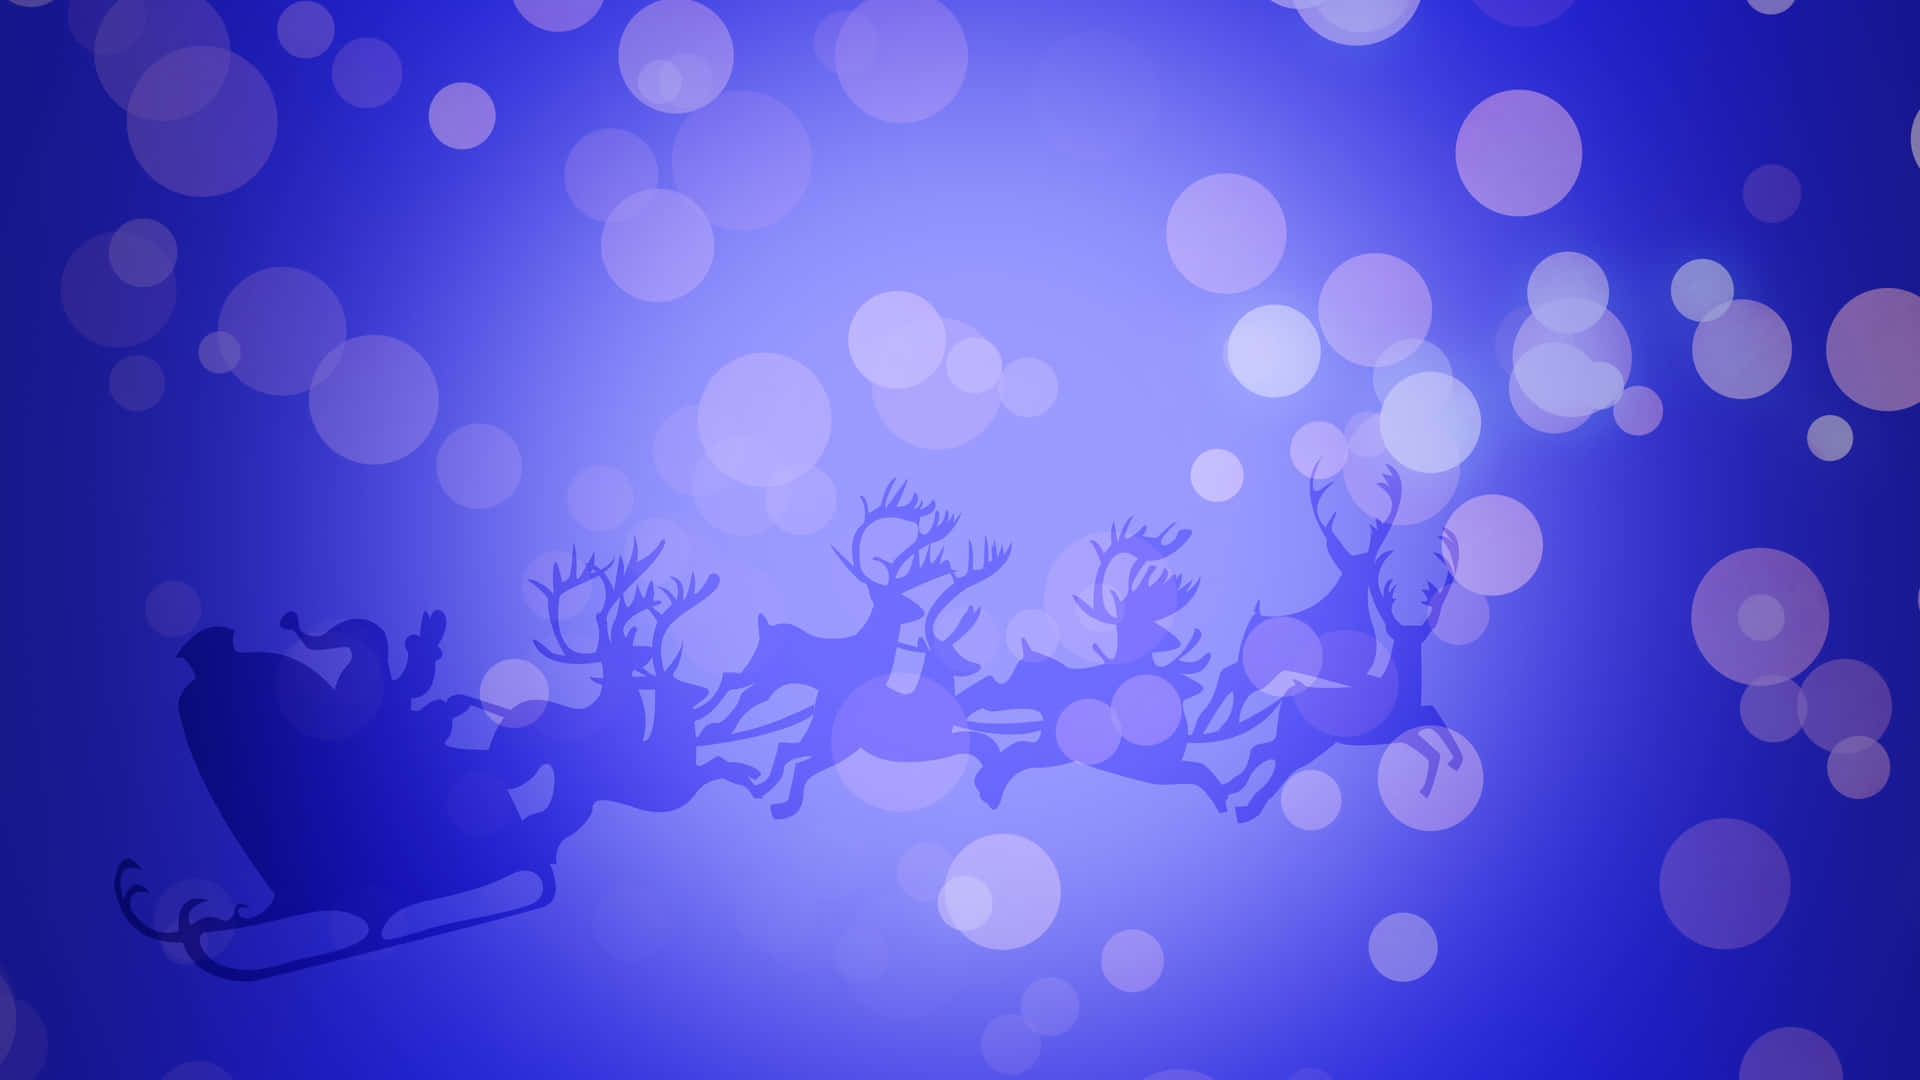 Festive Christmas Background with Gifts and Snowflakes Wallpaper